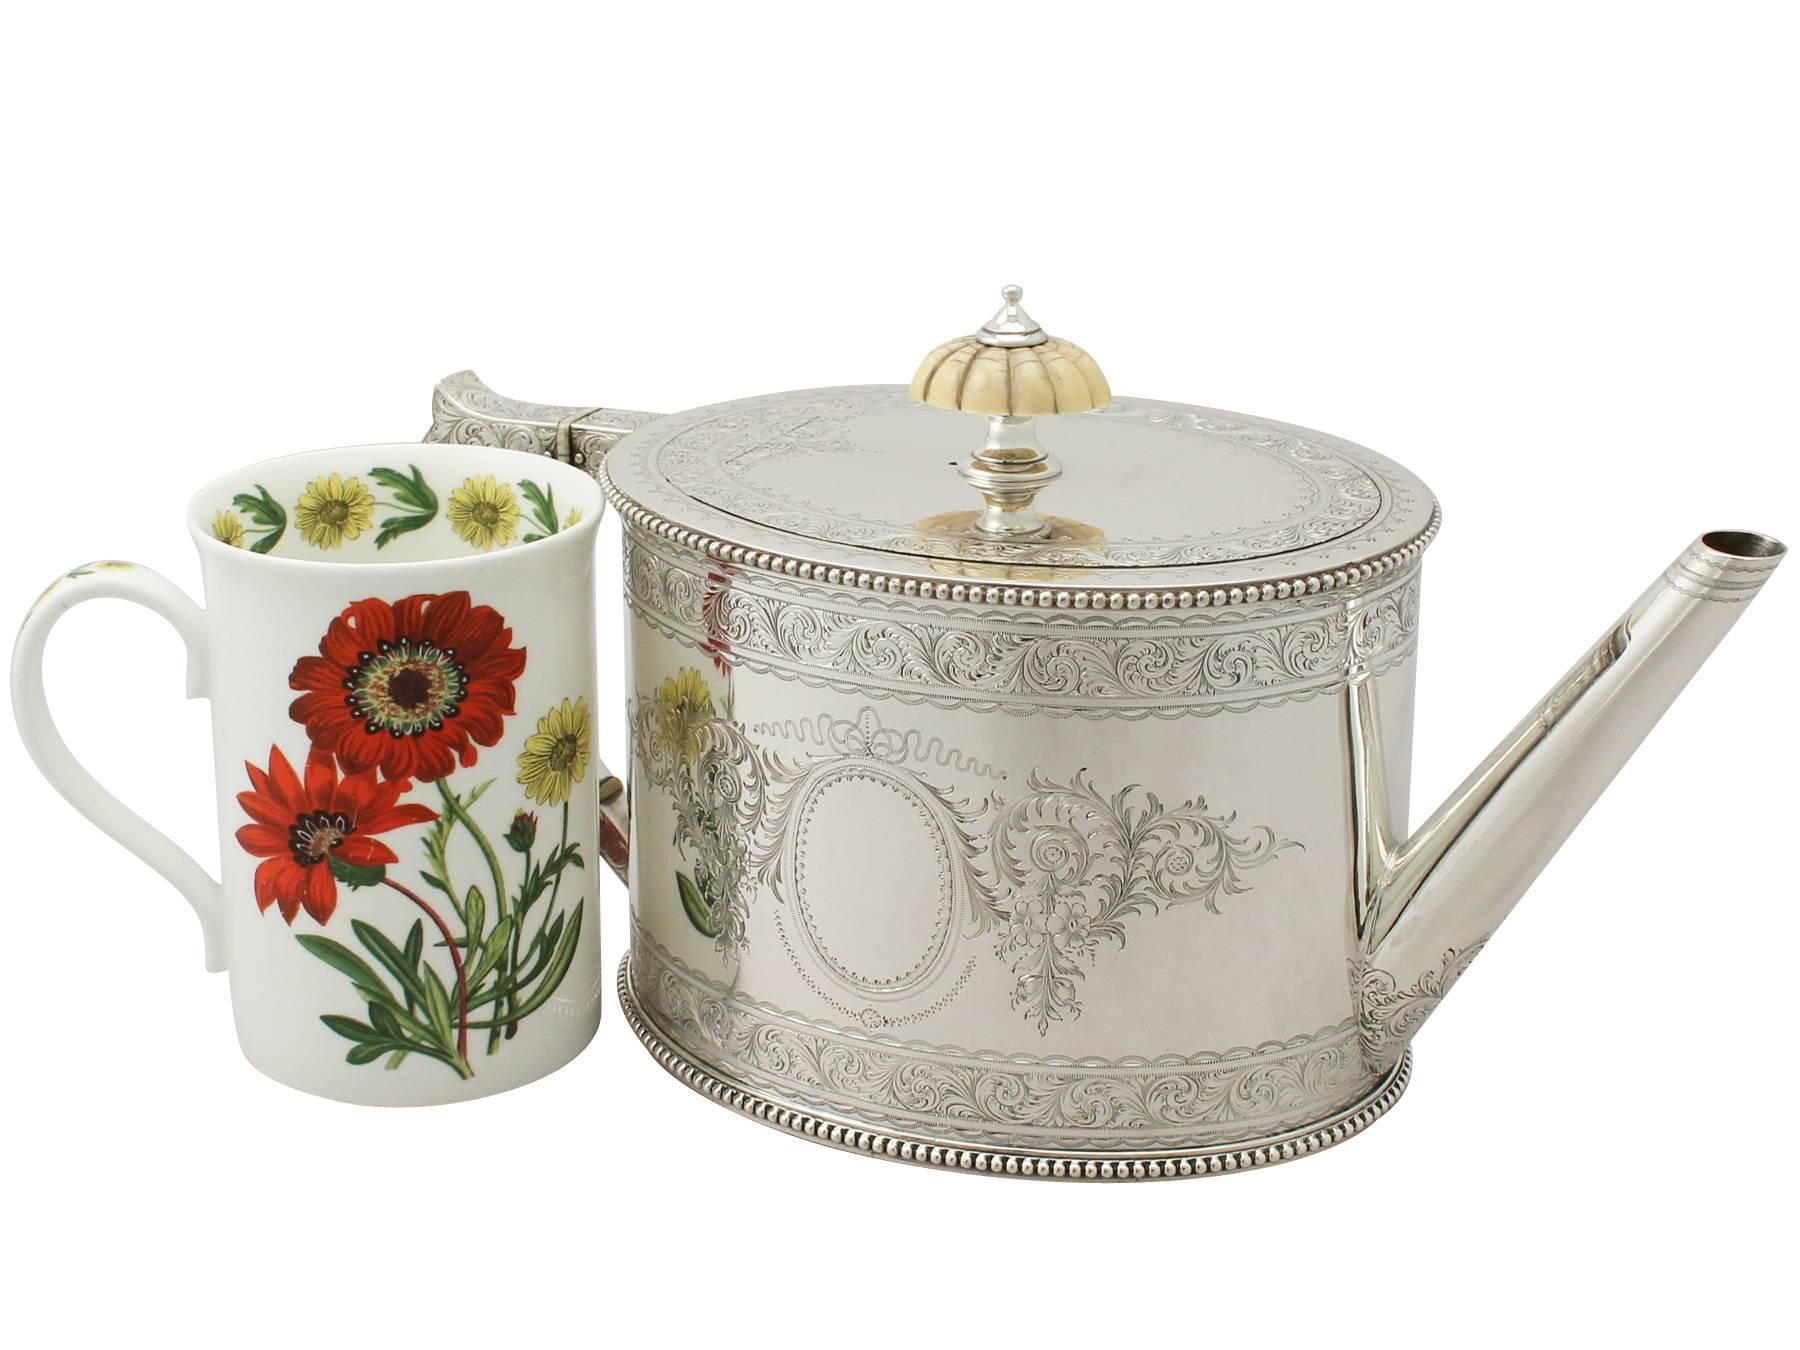 An exceptional, fine and impressive antique Victorian English sterling silver teapot made by Elikington & Co Ltd; an addition to our silver teaware collection

This exceptional antique Victorian sterling silver teapot has an oval can shaped